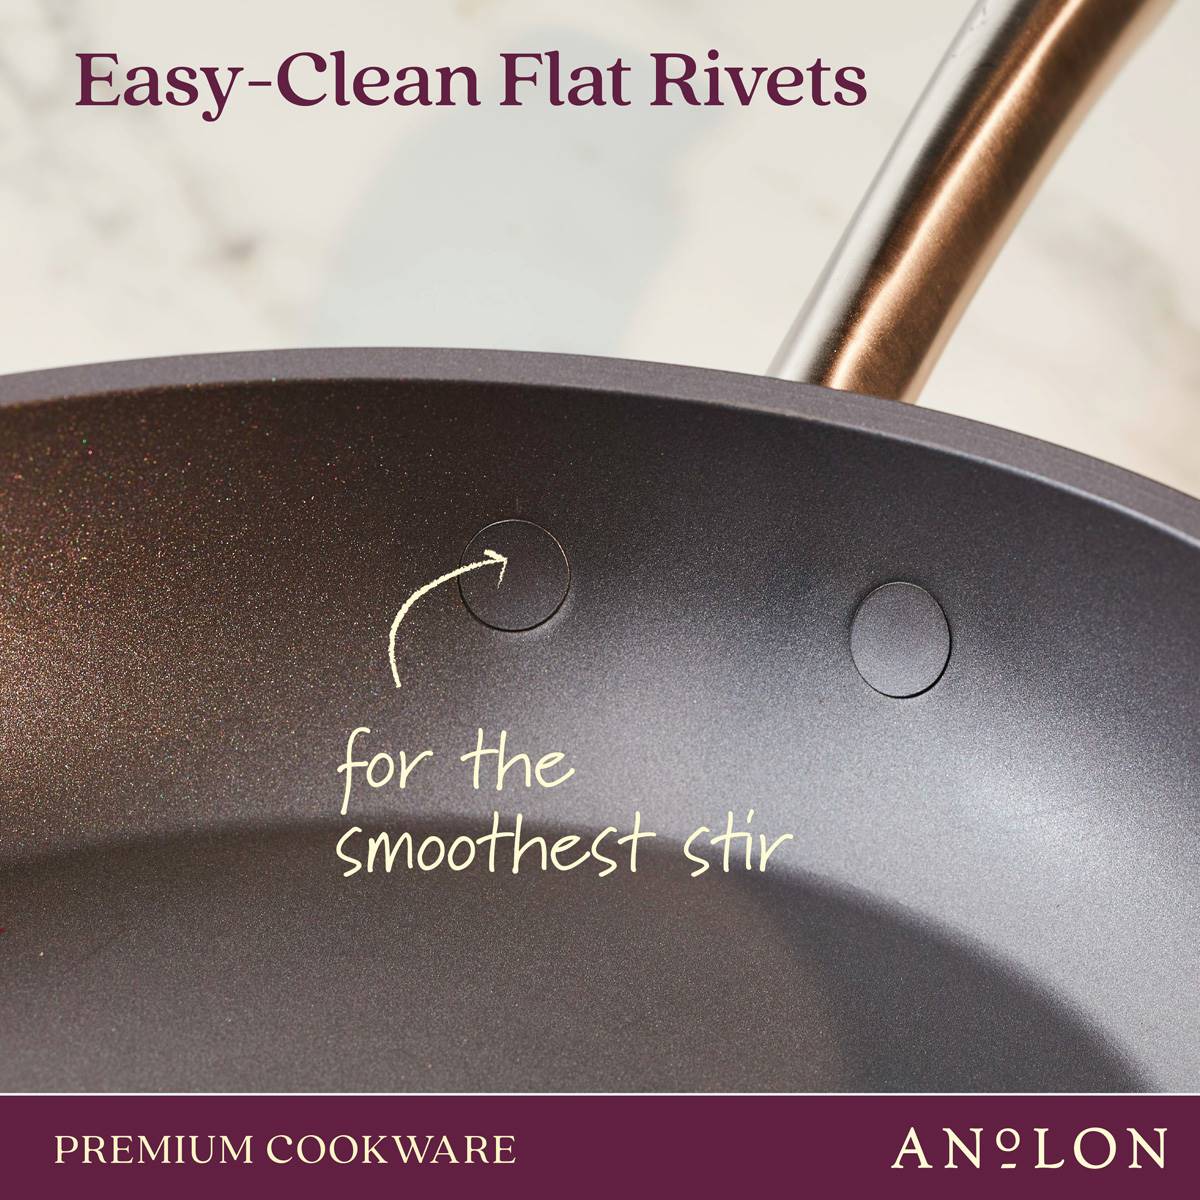 Anolon(R) Accolade 11in. Hard-Anodized Nonstick Grill Pan